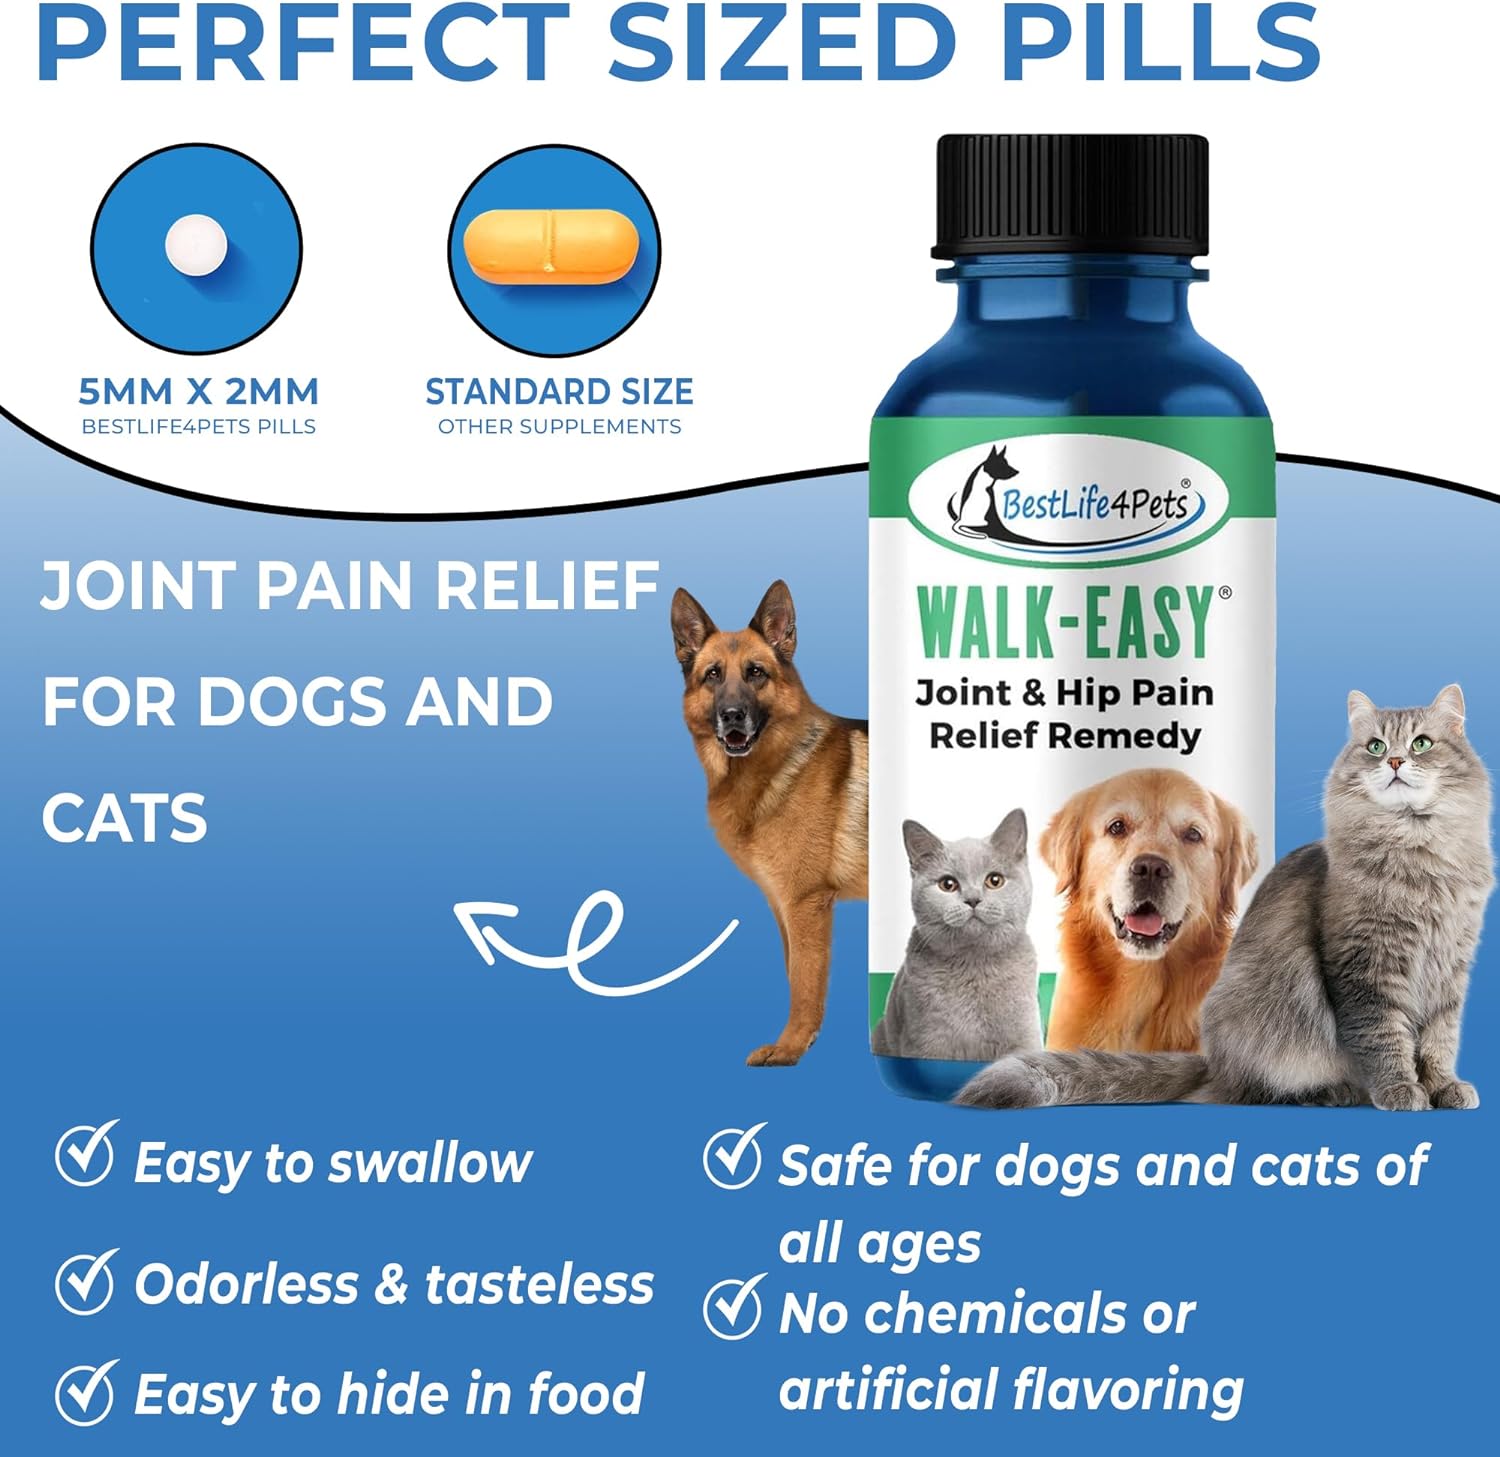 BestLife4Pets Walk-Easy Hip and Joint Supplement for Dogs & Cats - Arthritis Pain Relief and Anti-inflammatory Support Pills for Dogs & Cats Joint Pain Relief - Easy to Use Natural Pills